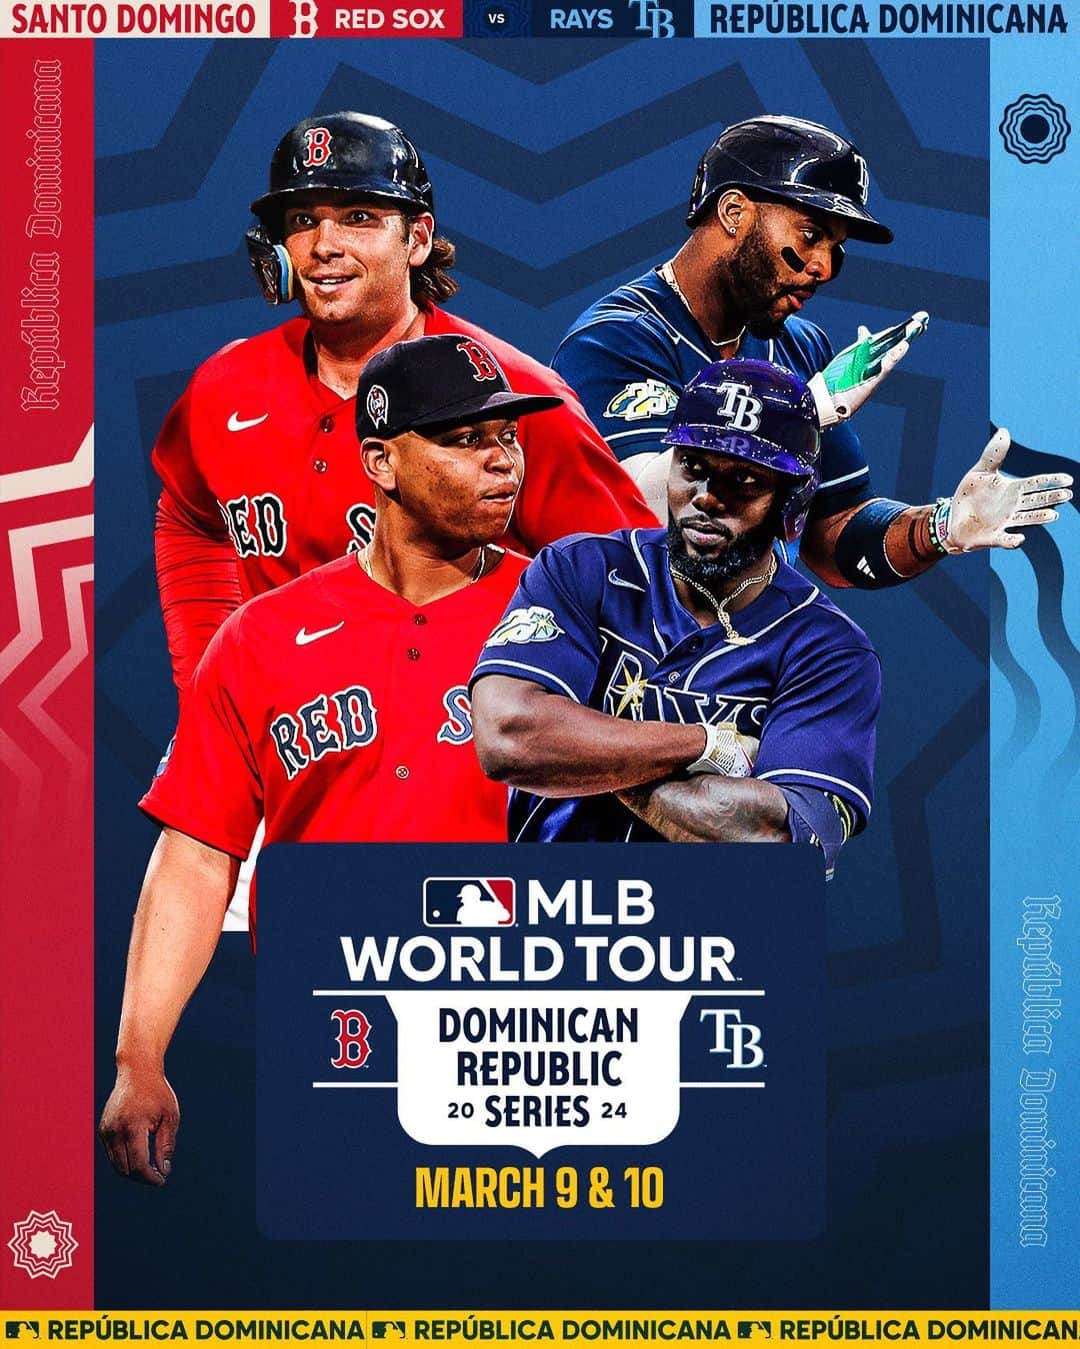 MLBのインスタグラム：「#SpringTraining: Dominican Republic edition!  The @RedSox will face @RaysBaseball March 9-10 at Estadio Quisqueya in Santo Domingo. Tickets are on sale December 12! MLB.com/Dominican」